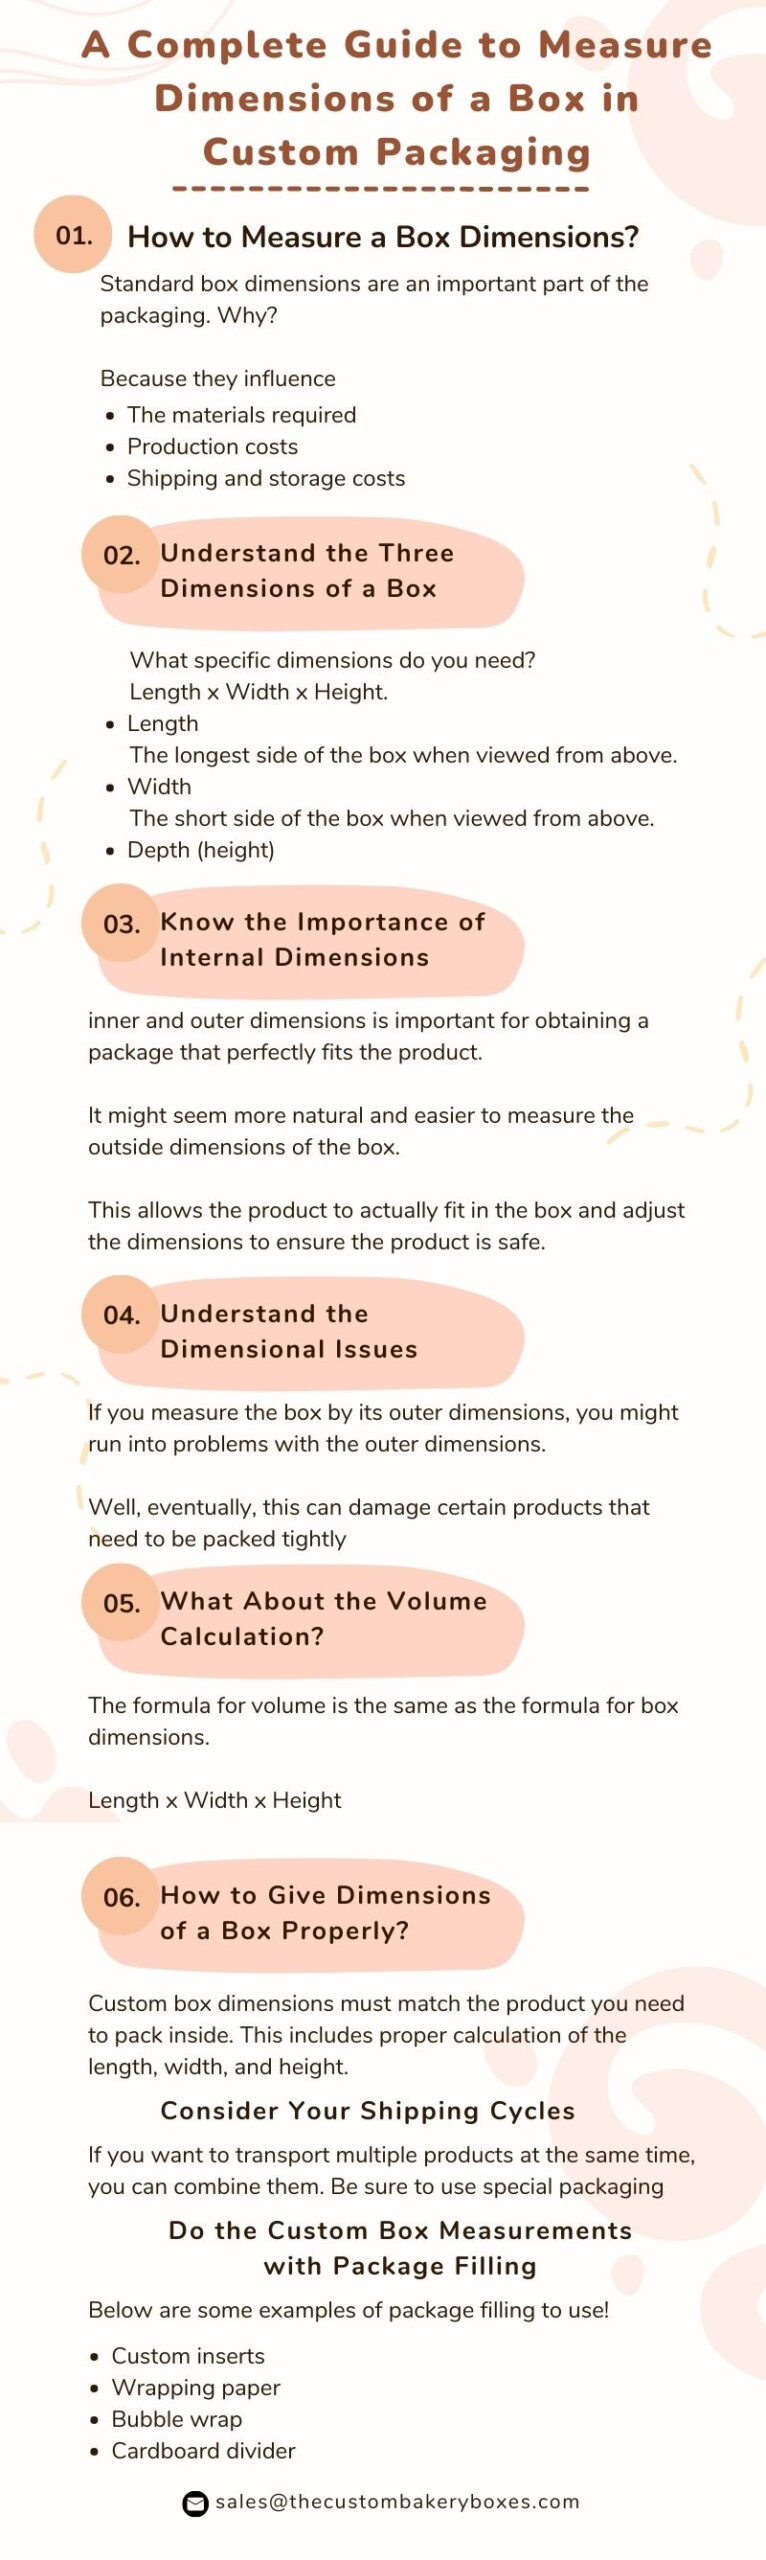 A Complete Guide to Measure Dimensions of a Box in Custom Packaging